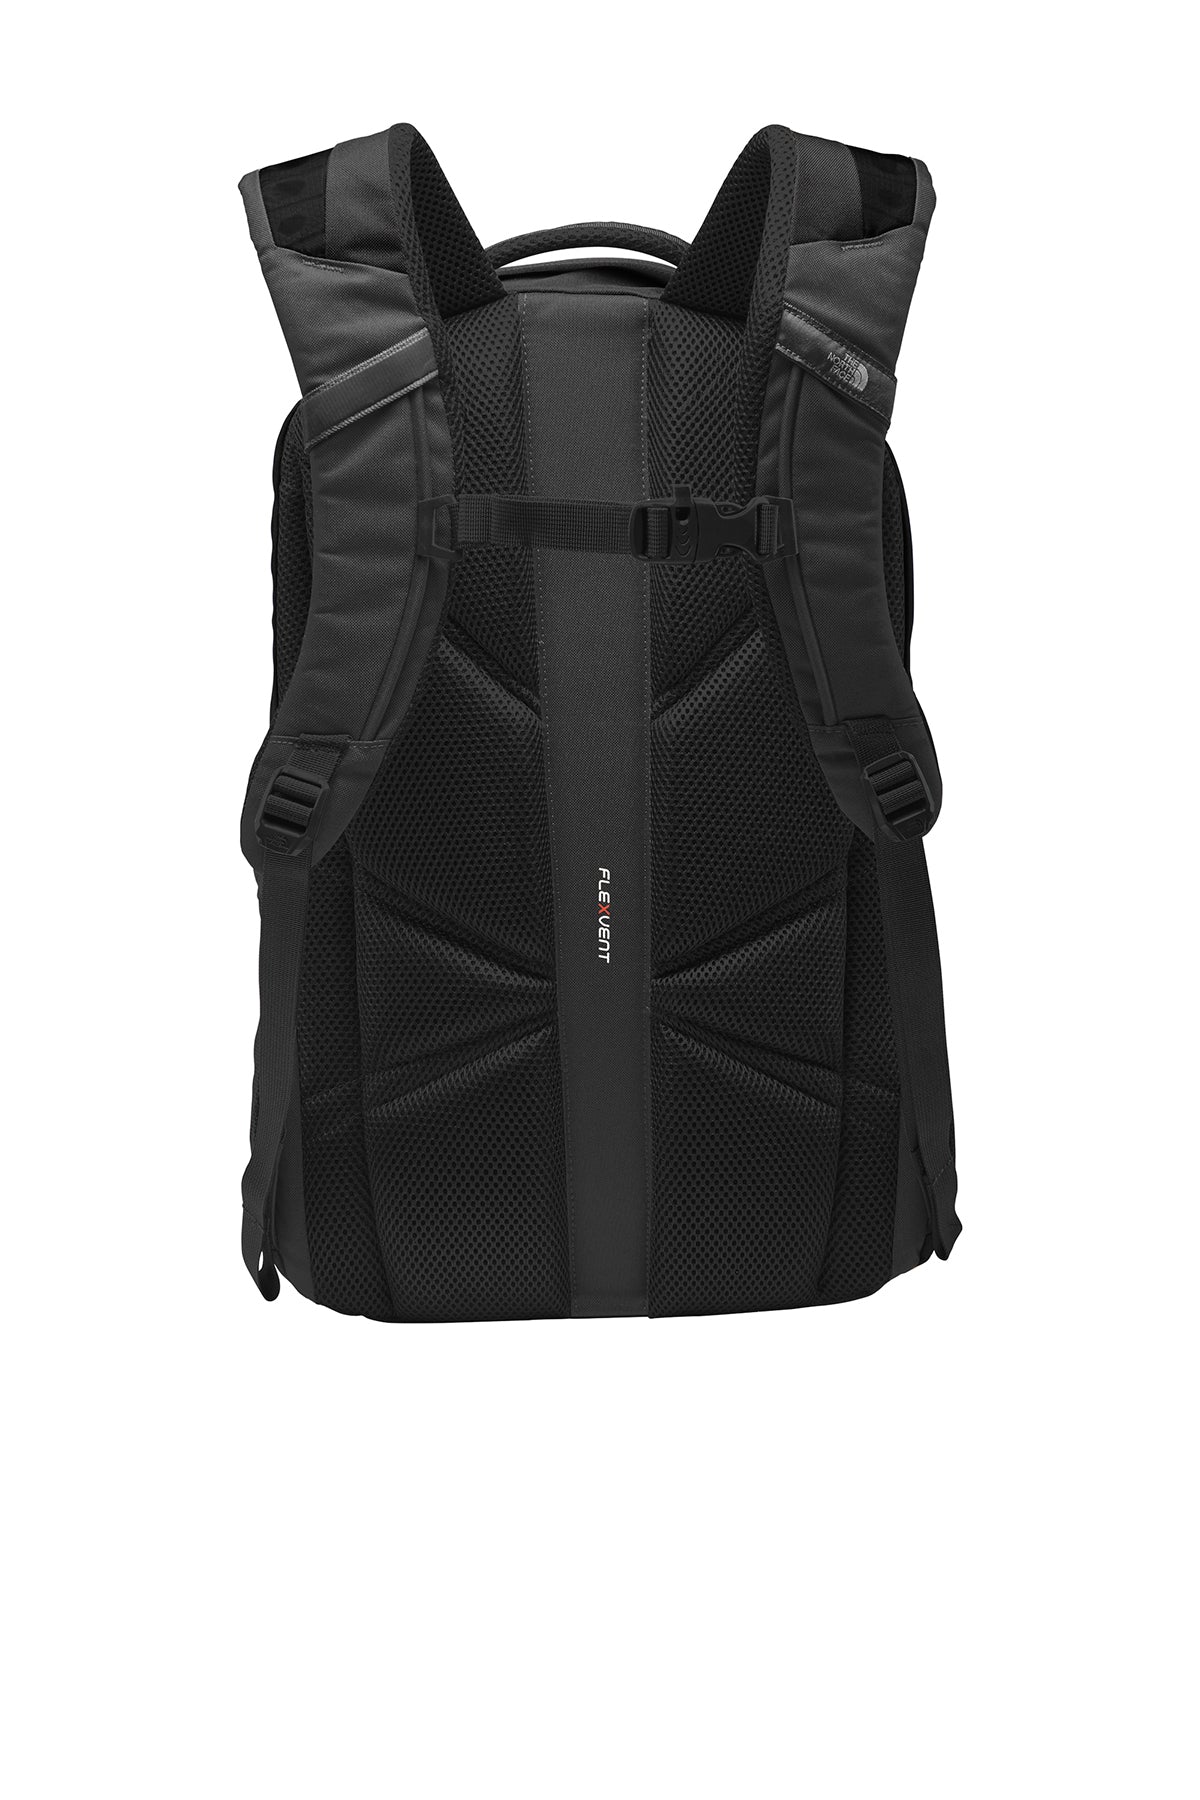 North Face Groundwork Backpack TNF Dark Grey Heather/ Cardinal Red